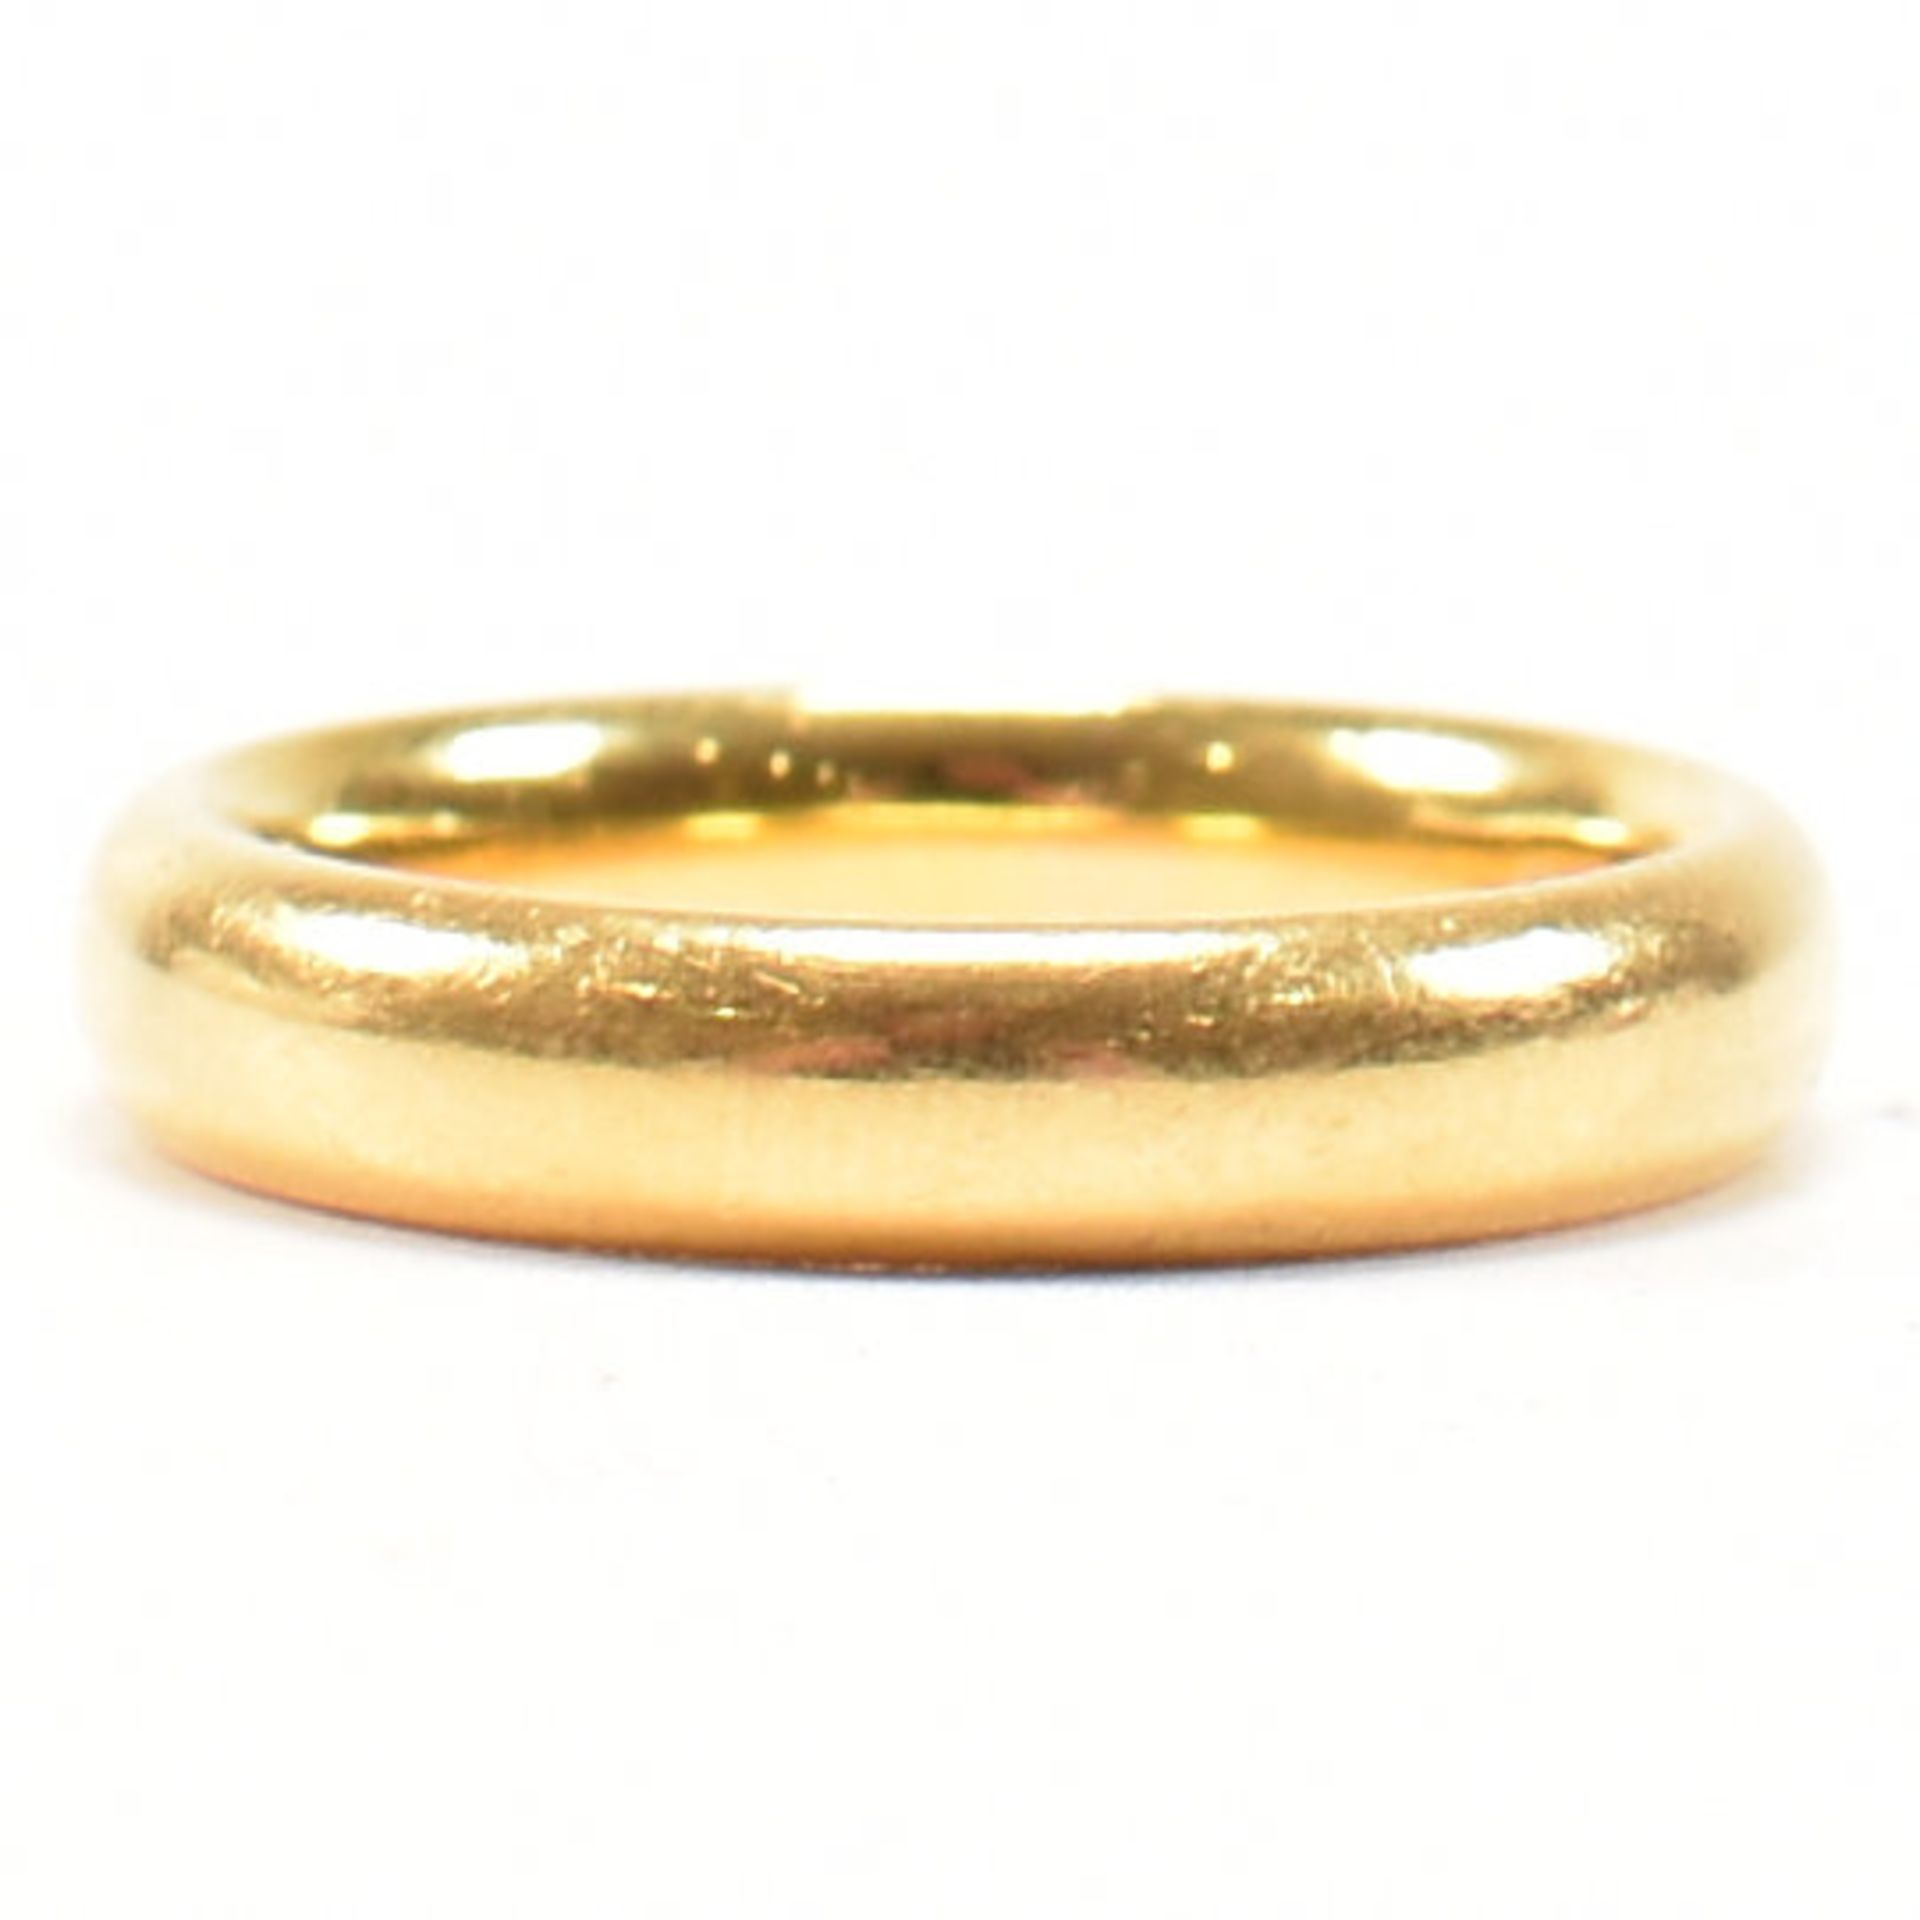 HALLMARKED 22CT GOLD BAND RING - Image 2 of 8